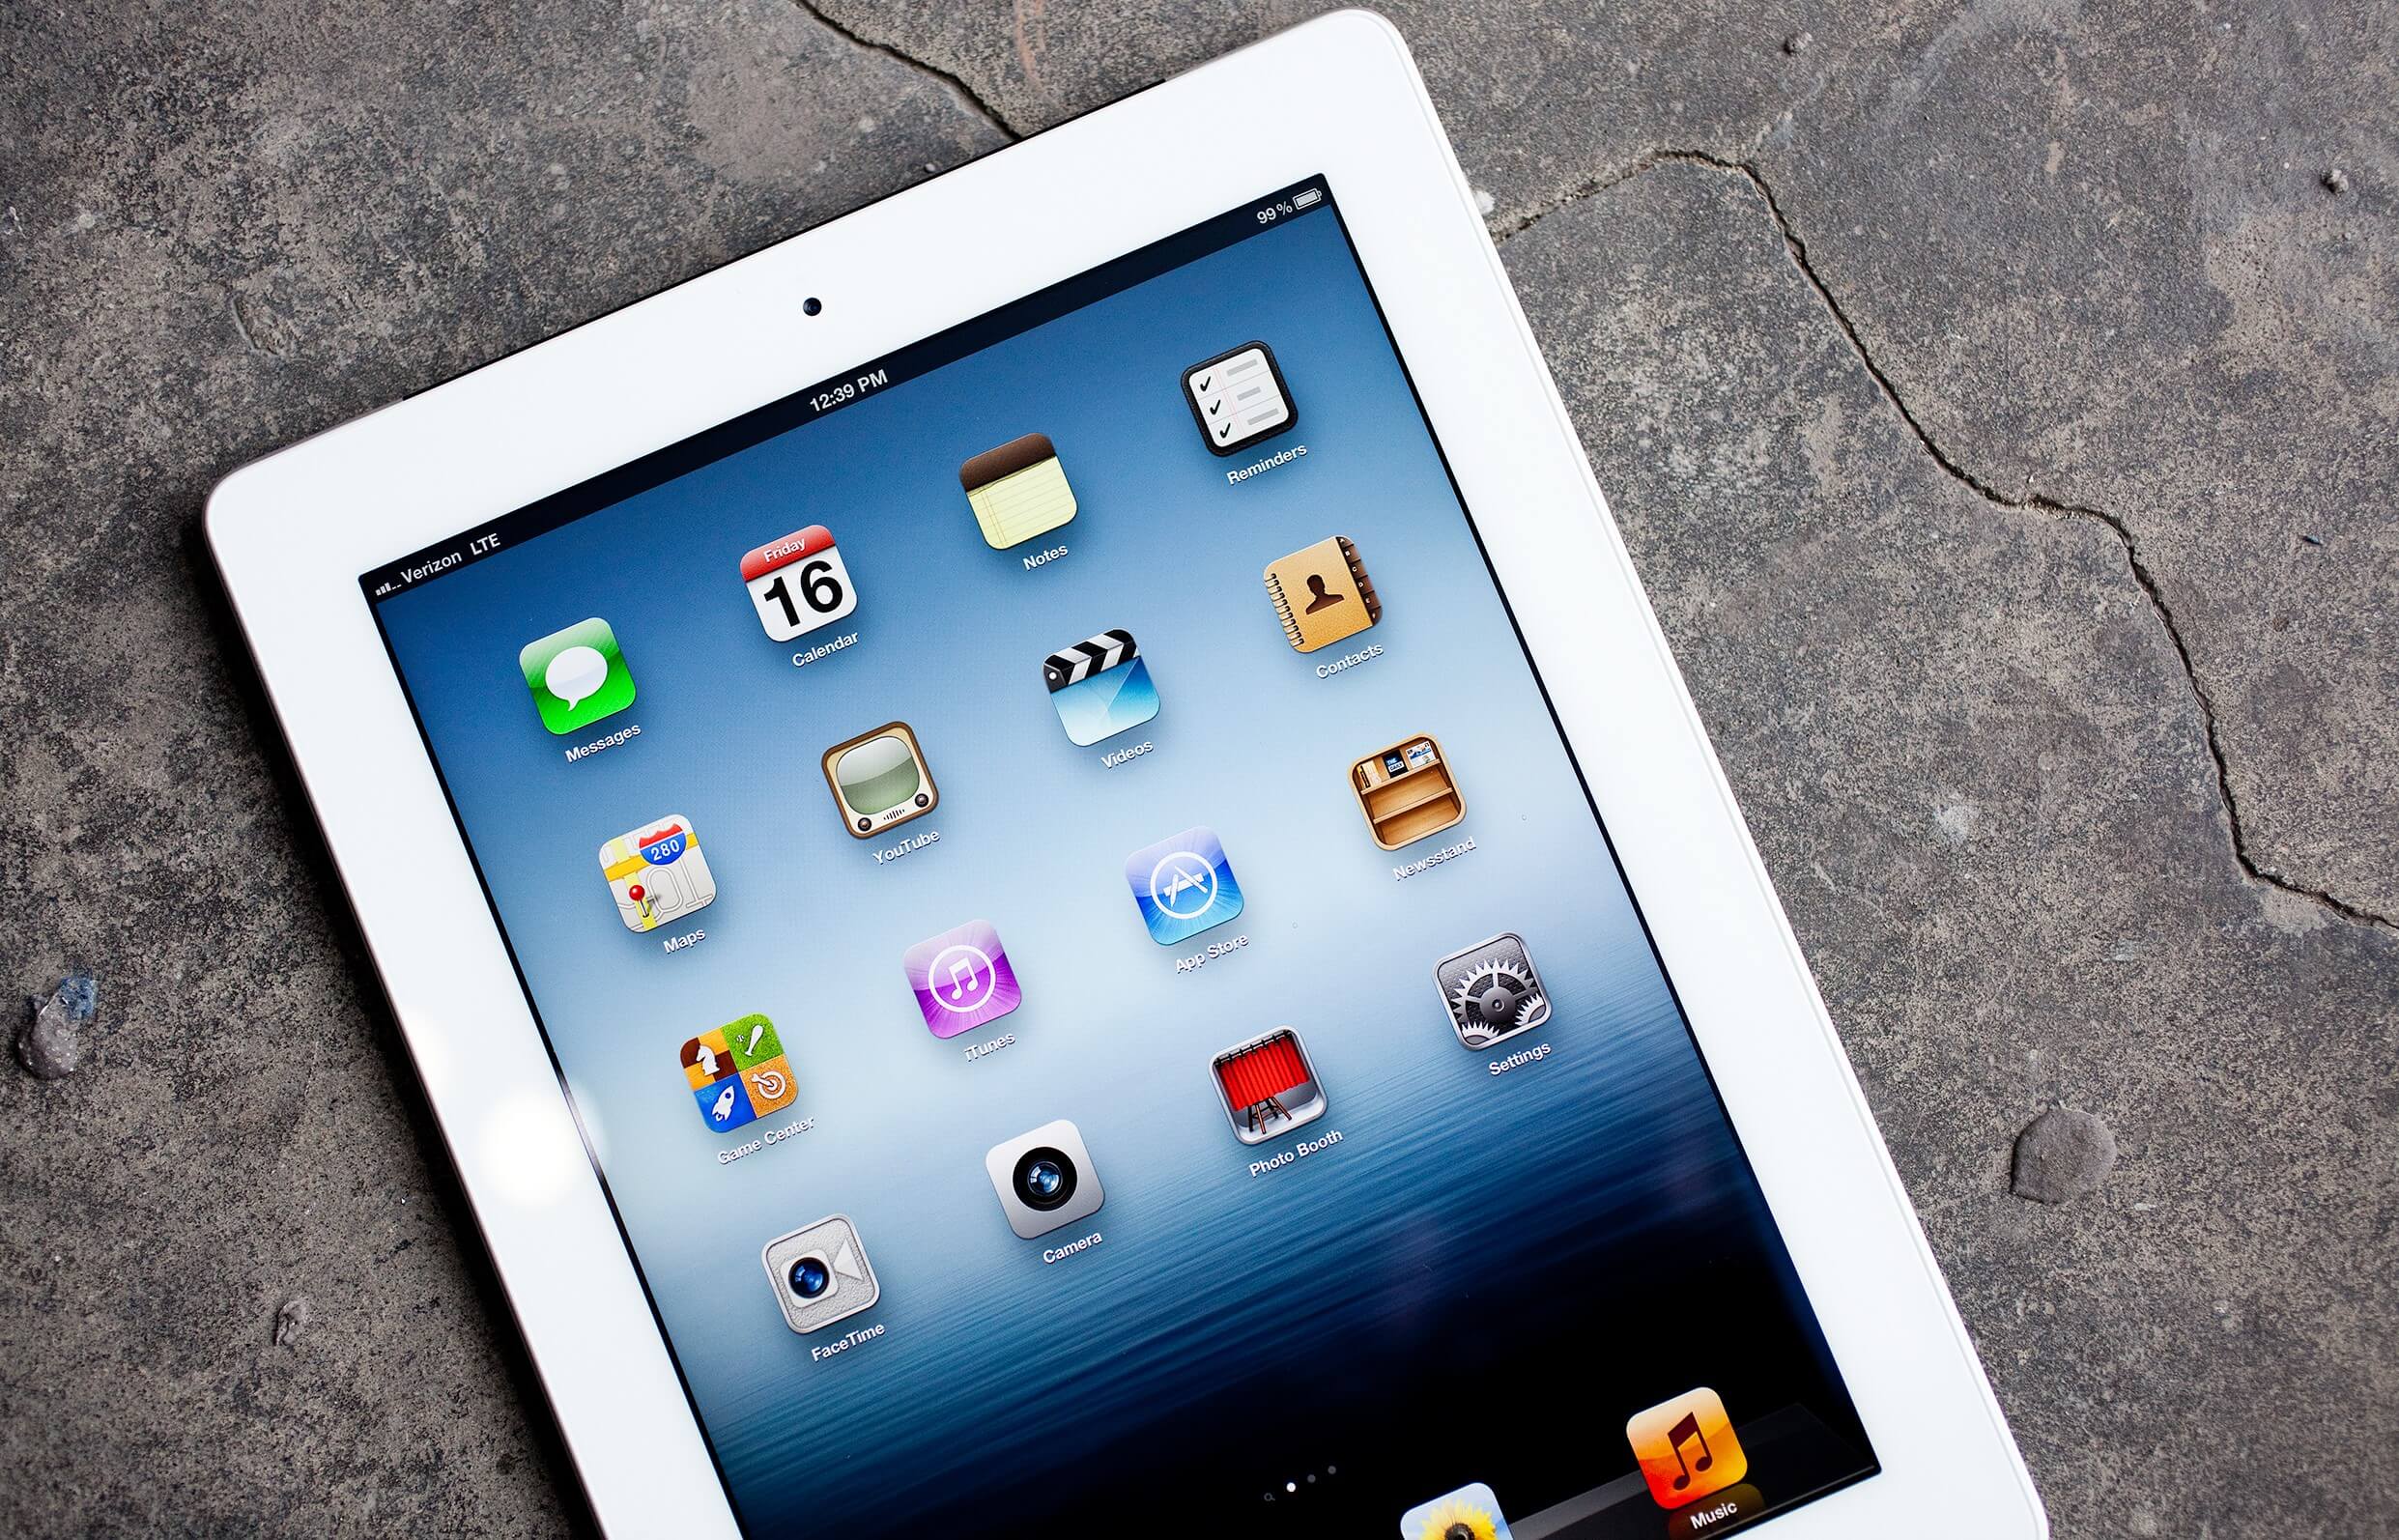 Apple adds iPad 4 to obsolete product list